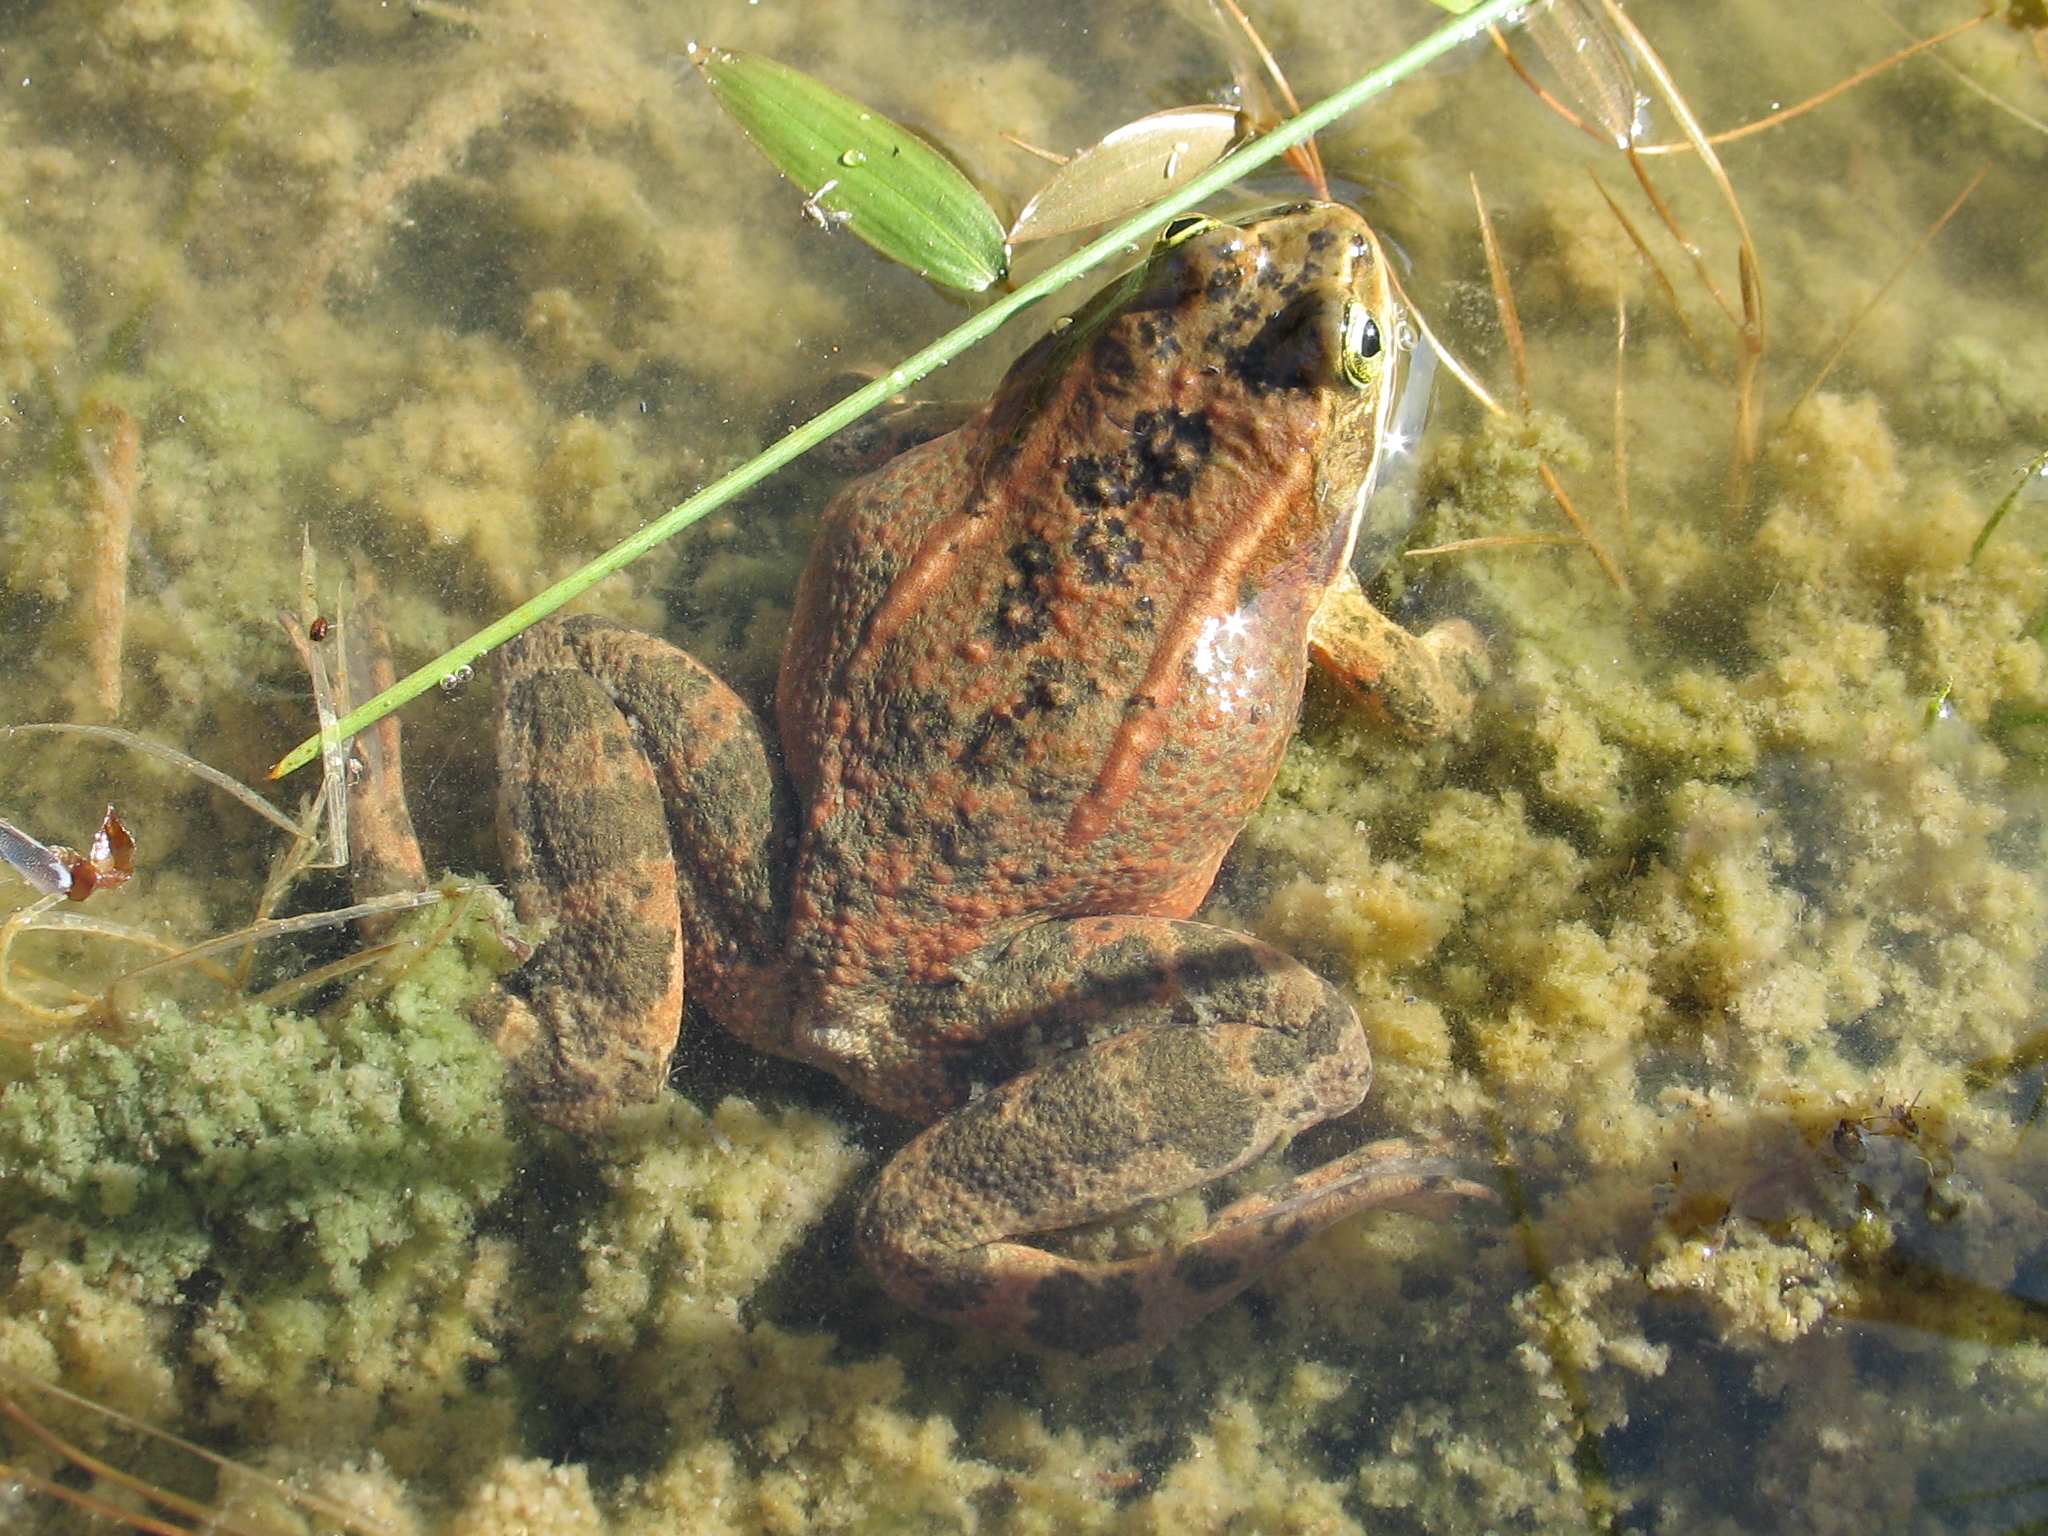 Oregon Spotted Frog in it's habitat<br />Photo by: Brome McCreary